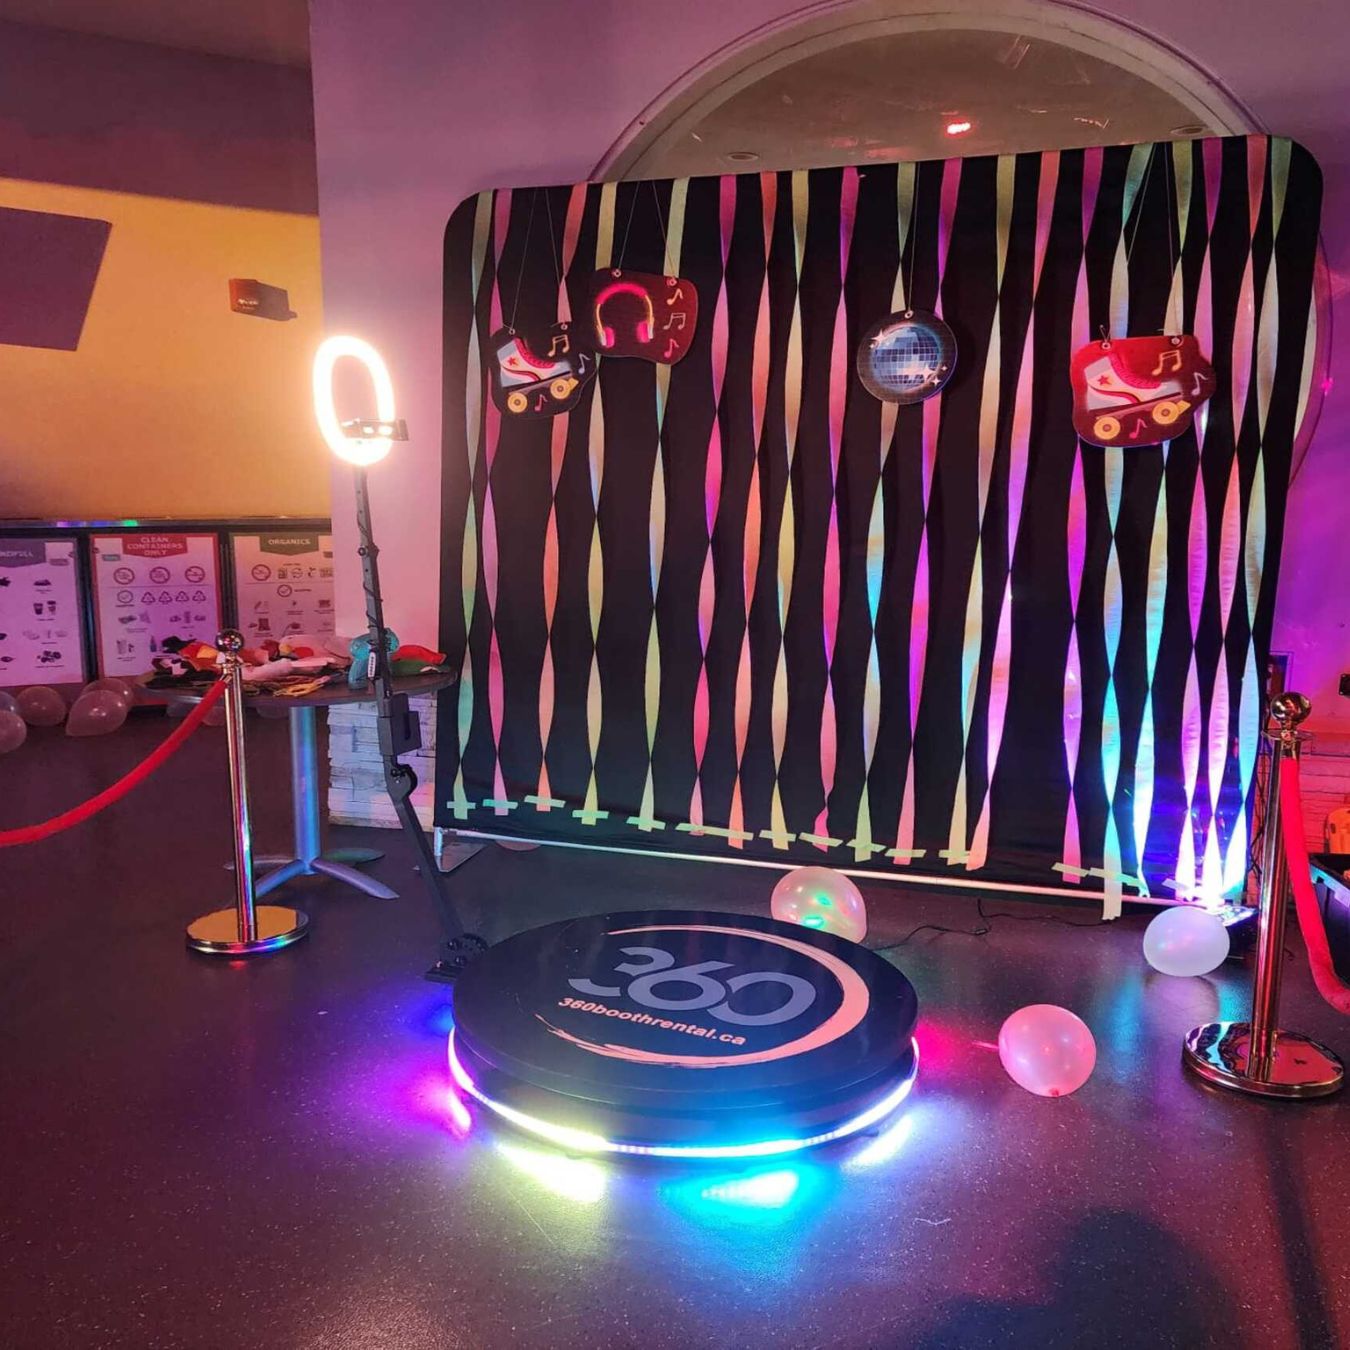 Photo Booths Of Indiana: 360 Photo Booth Rental